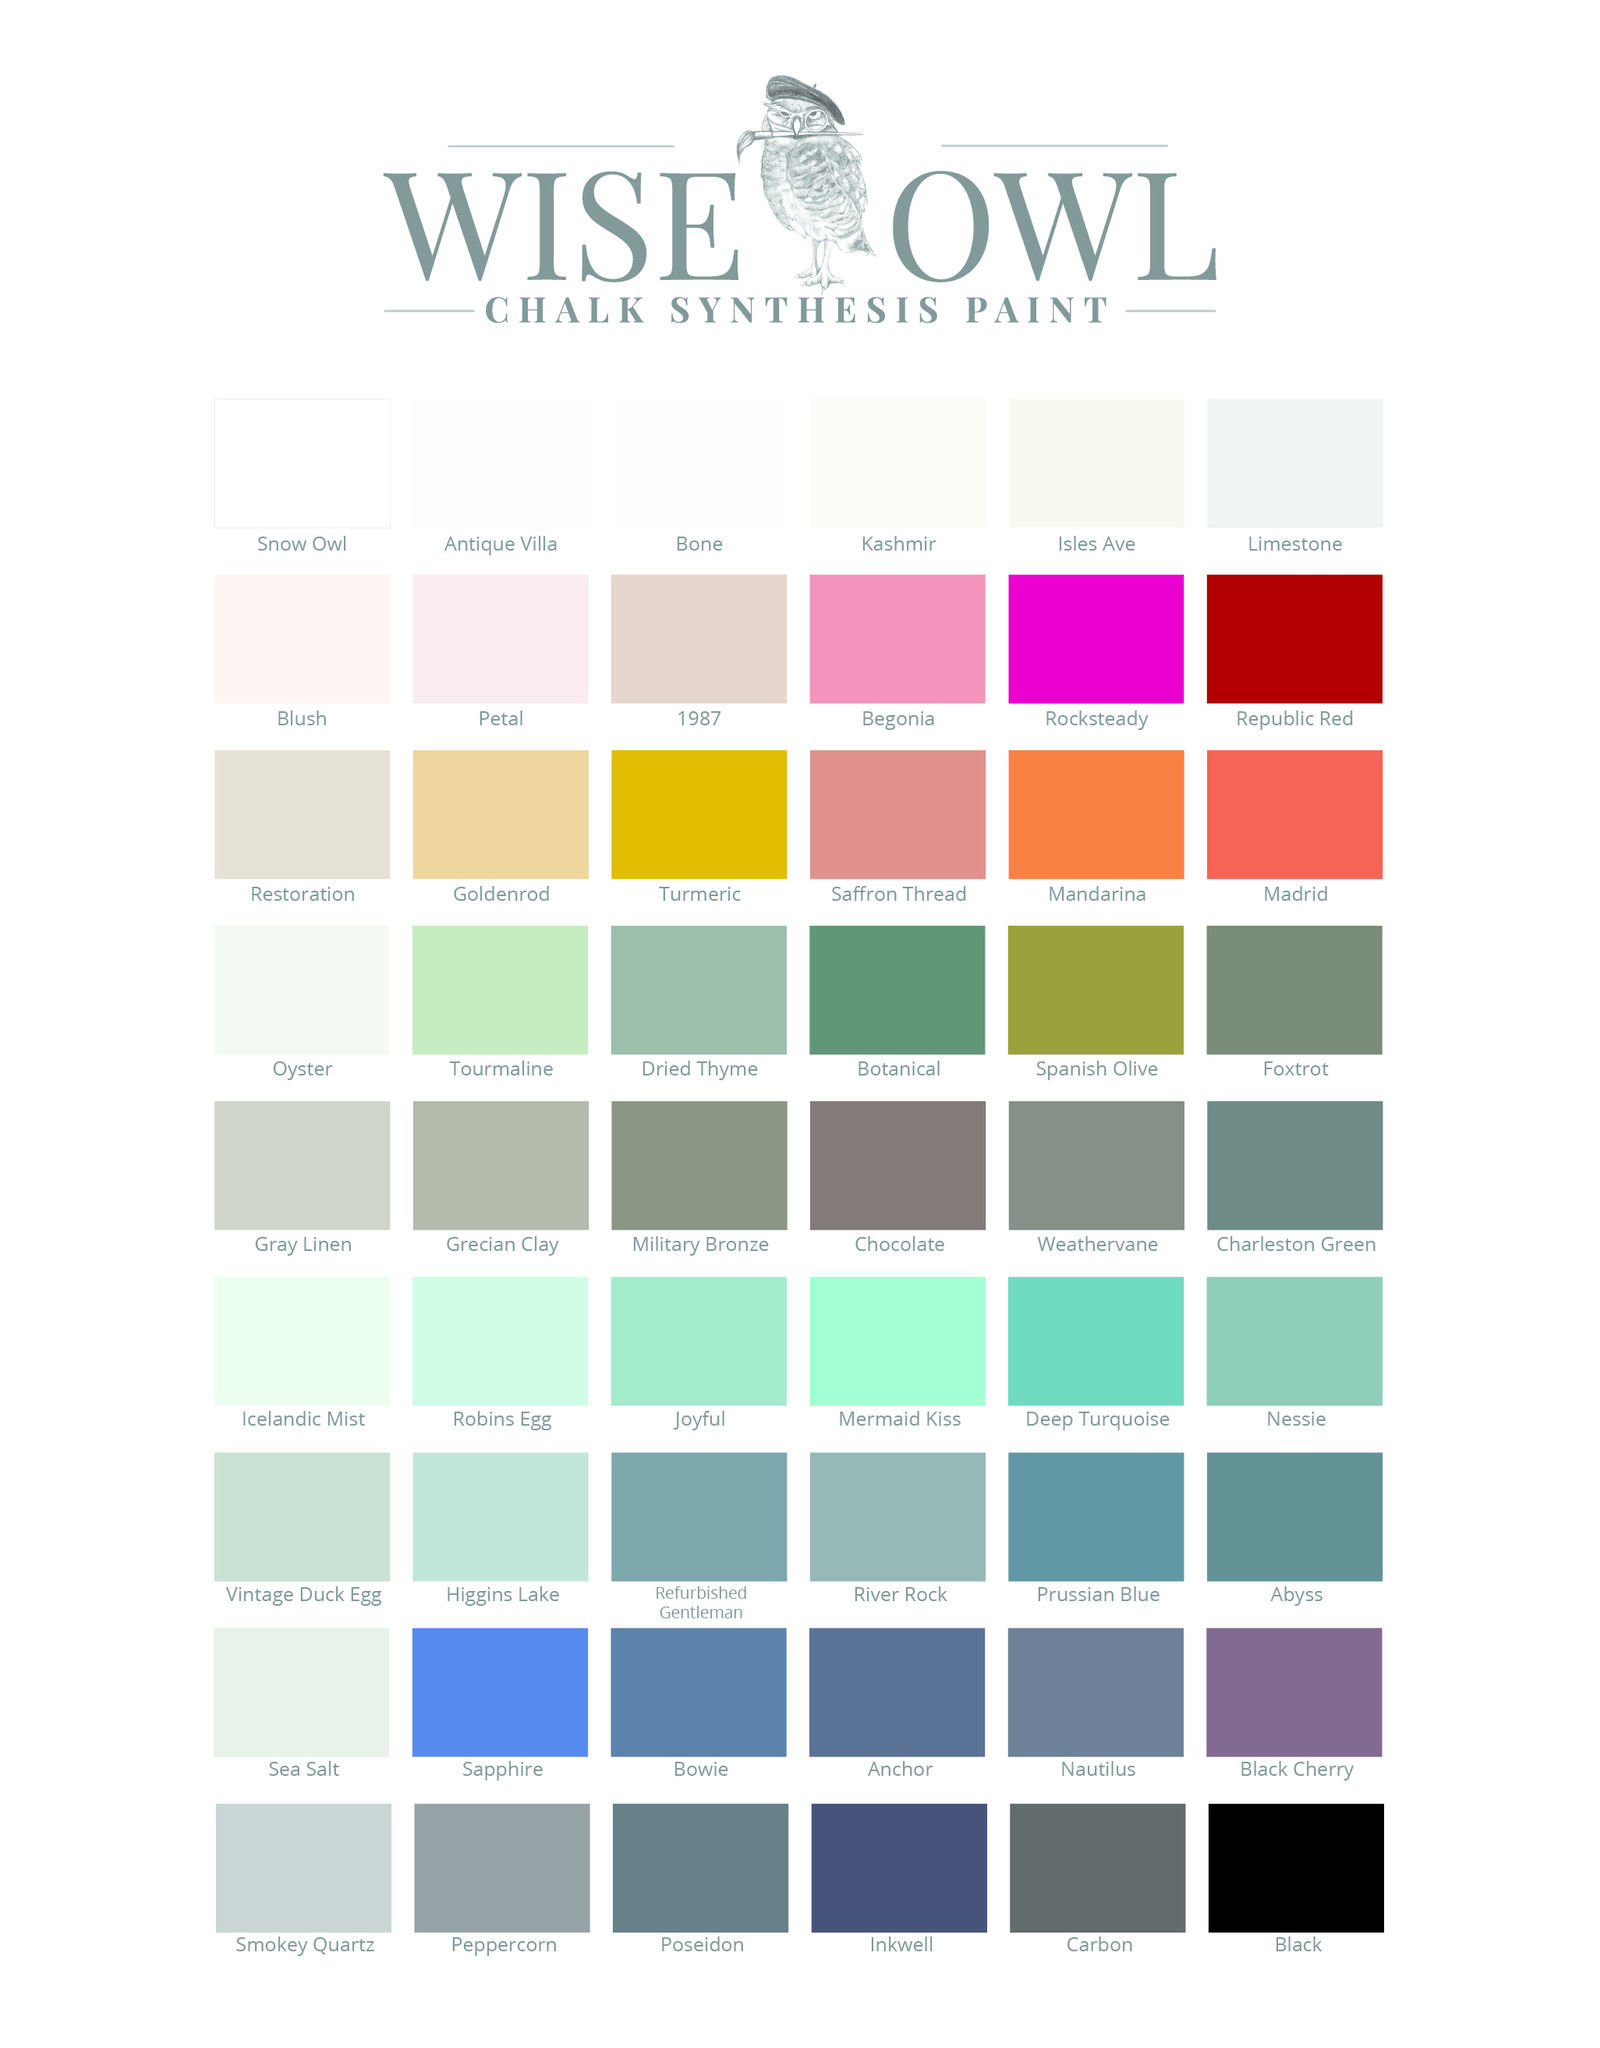 Wise Owl Paint Chalk Synthesis Paint Weathervane-Pint